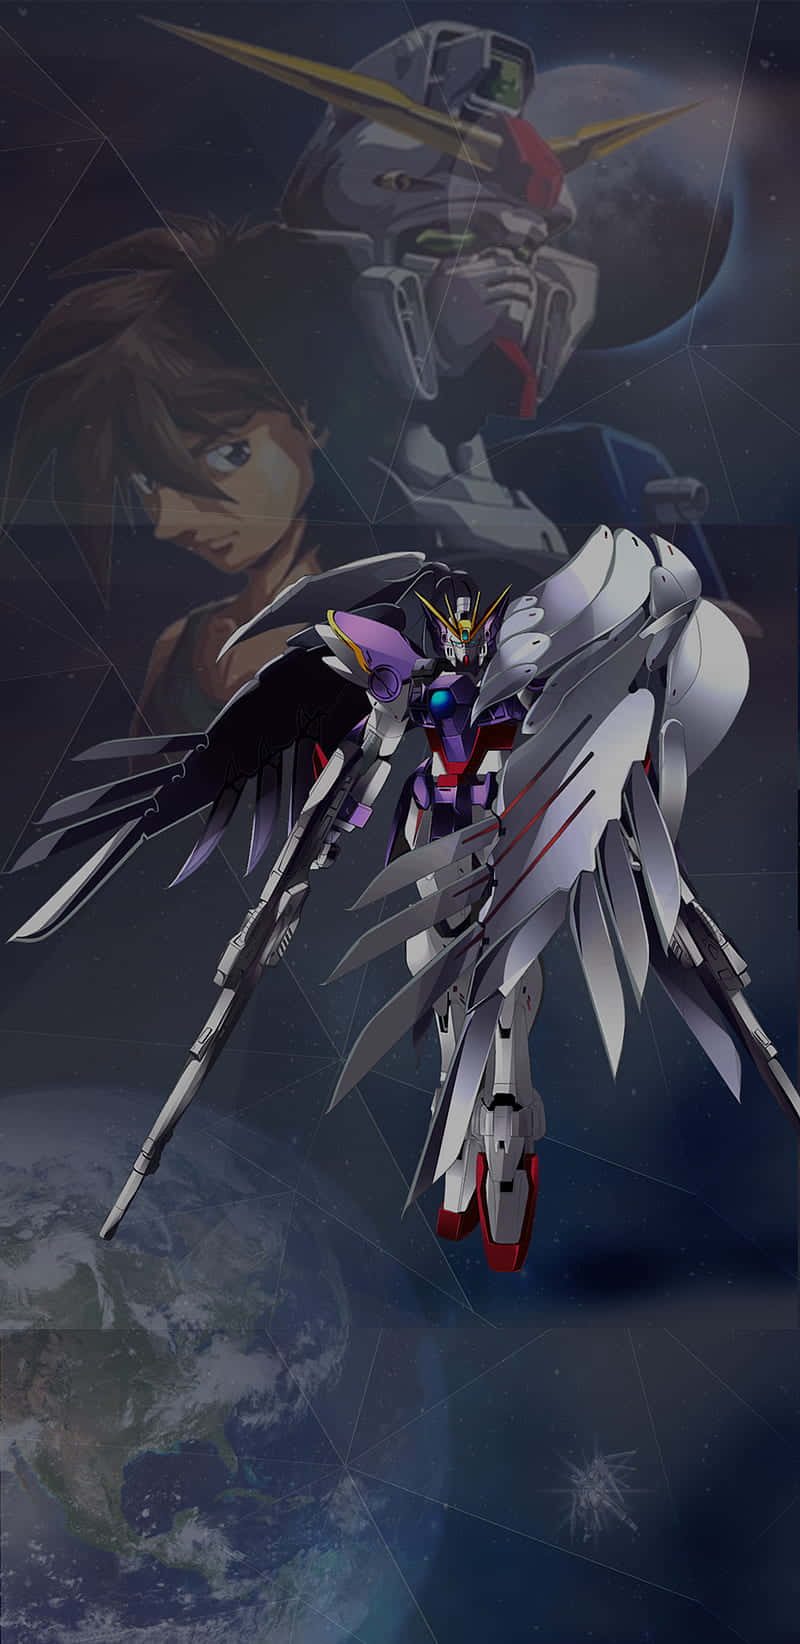 "Exploring the universe with Wing Gundam!" Wallpaper